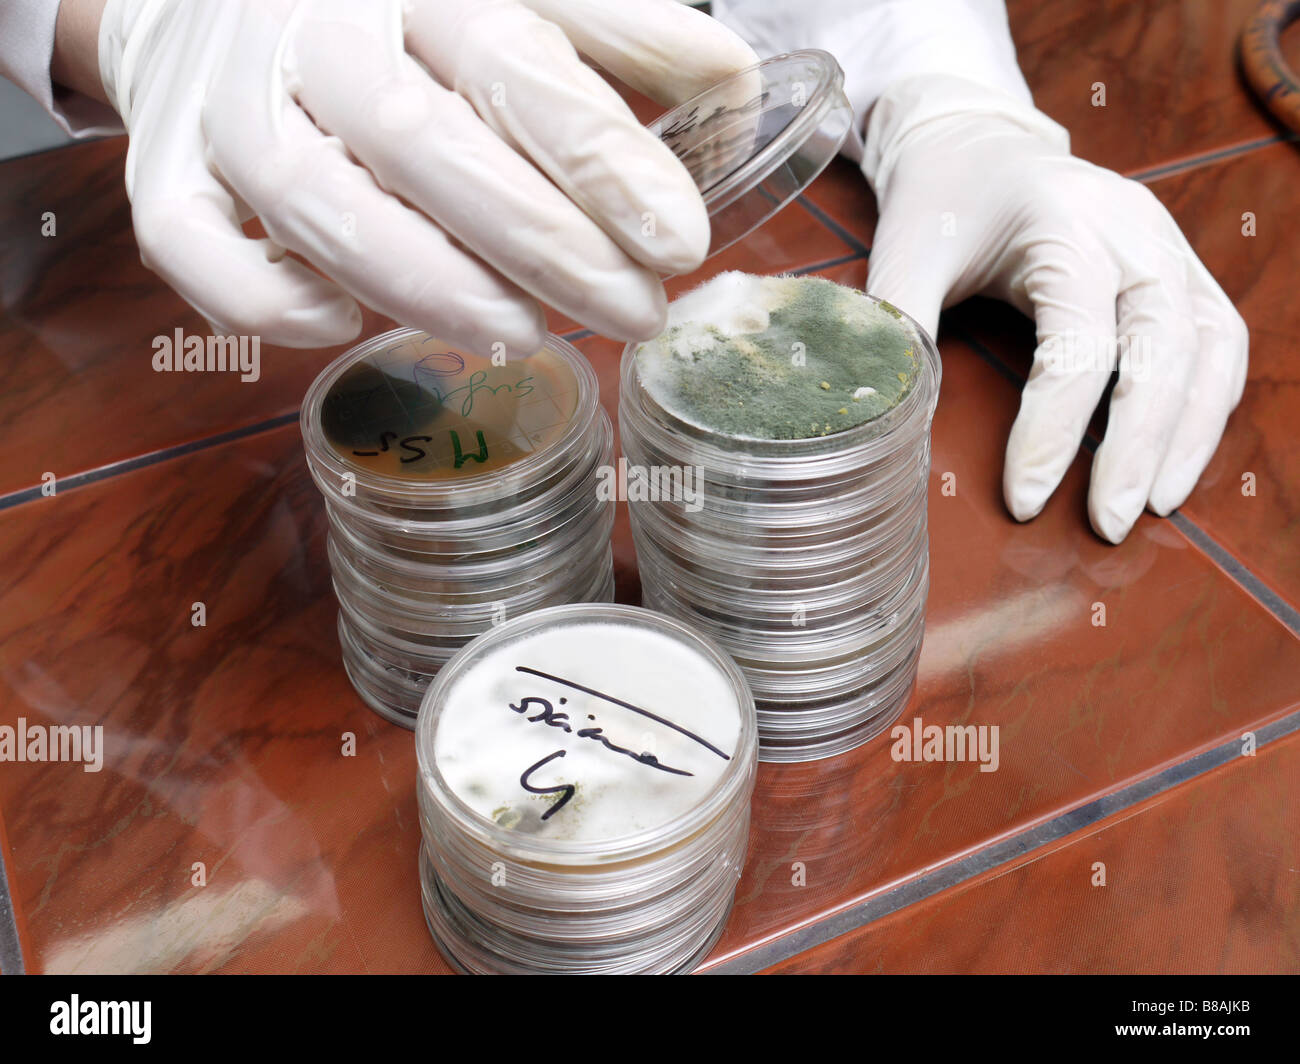 Closeup of chemist hands opening Petri dish with mold sample Stock Photo